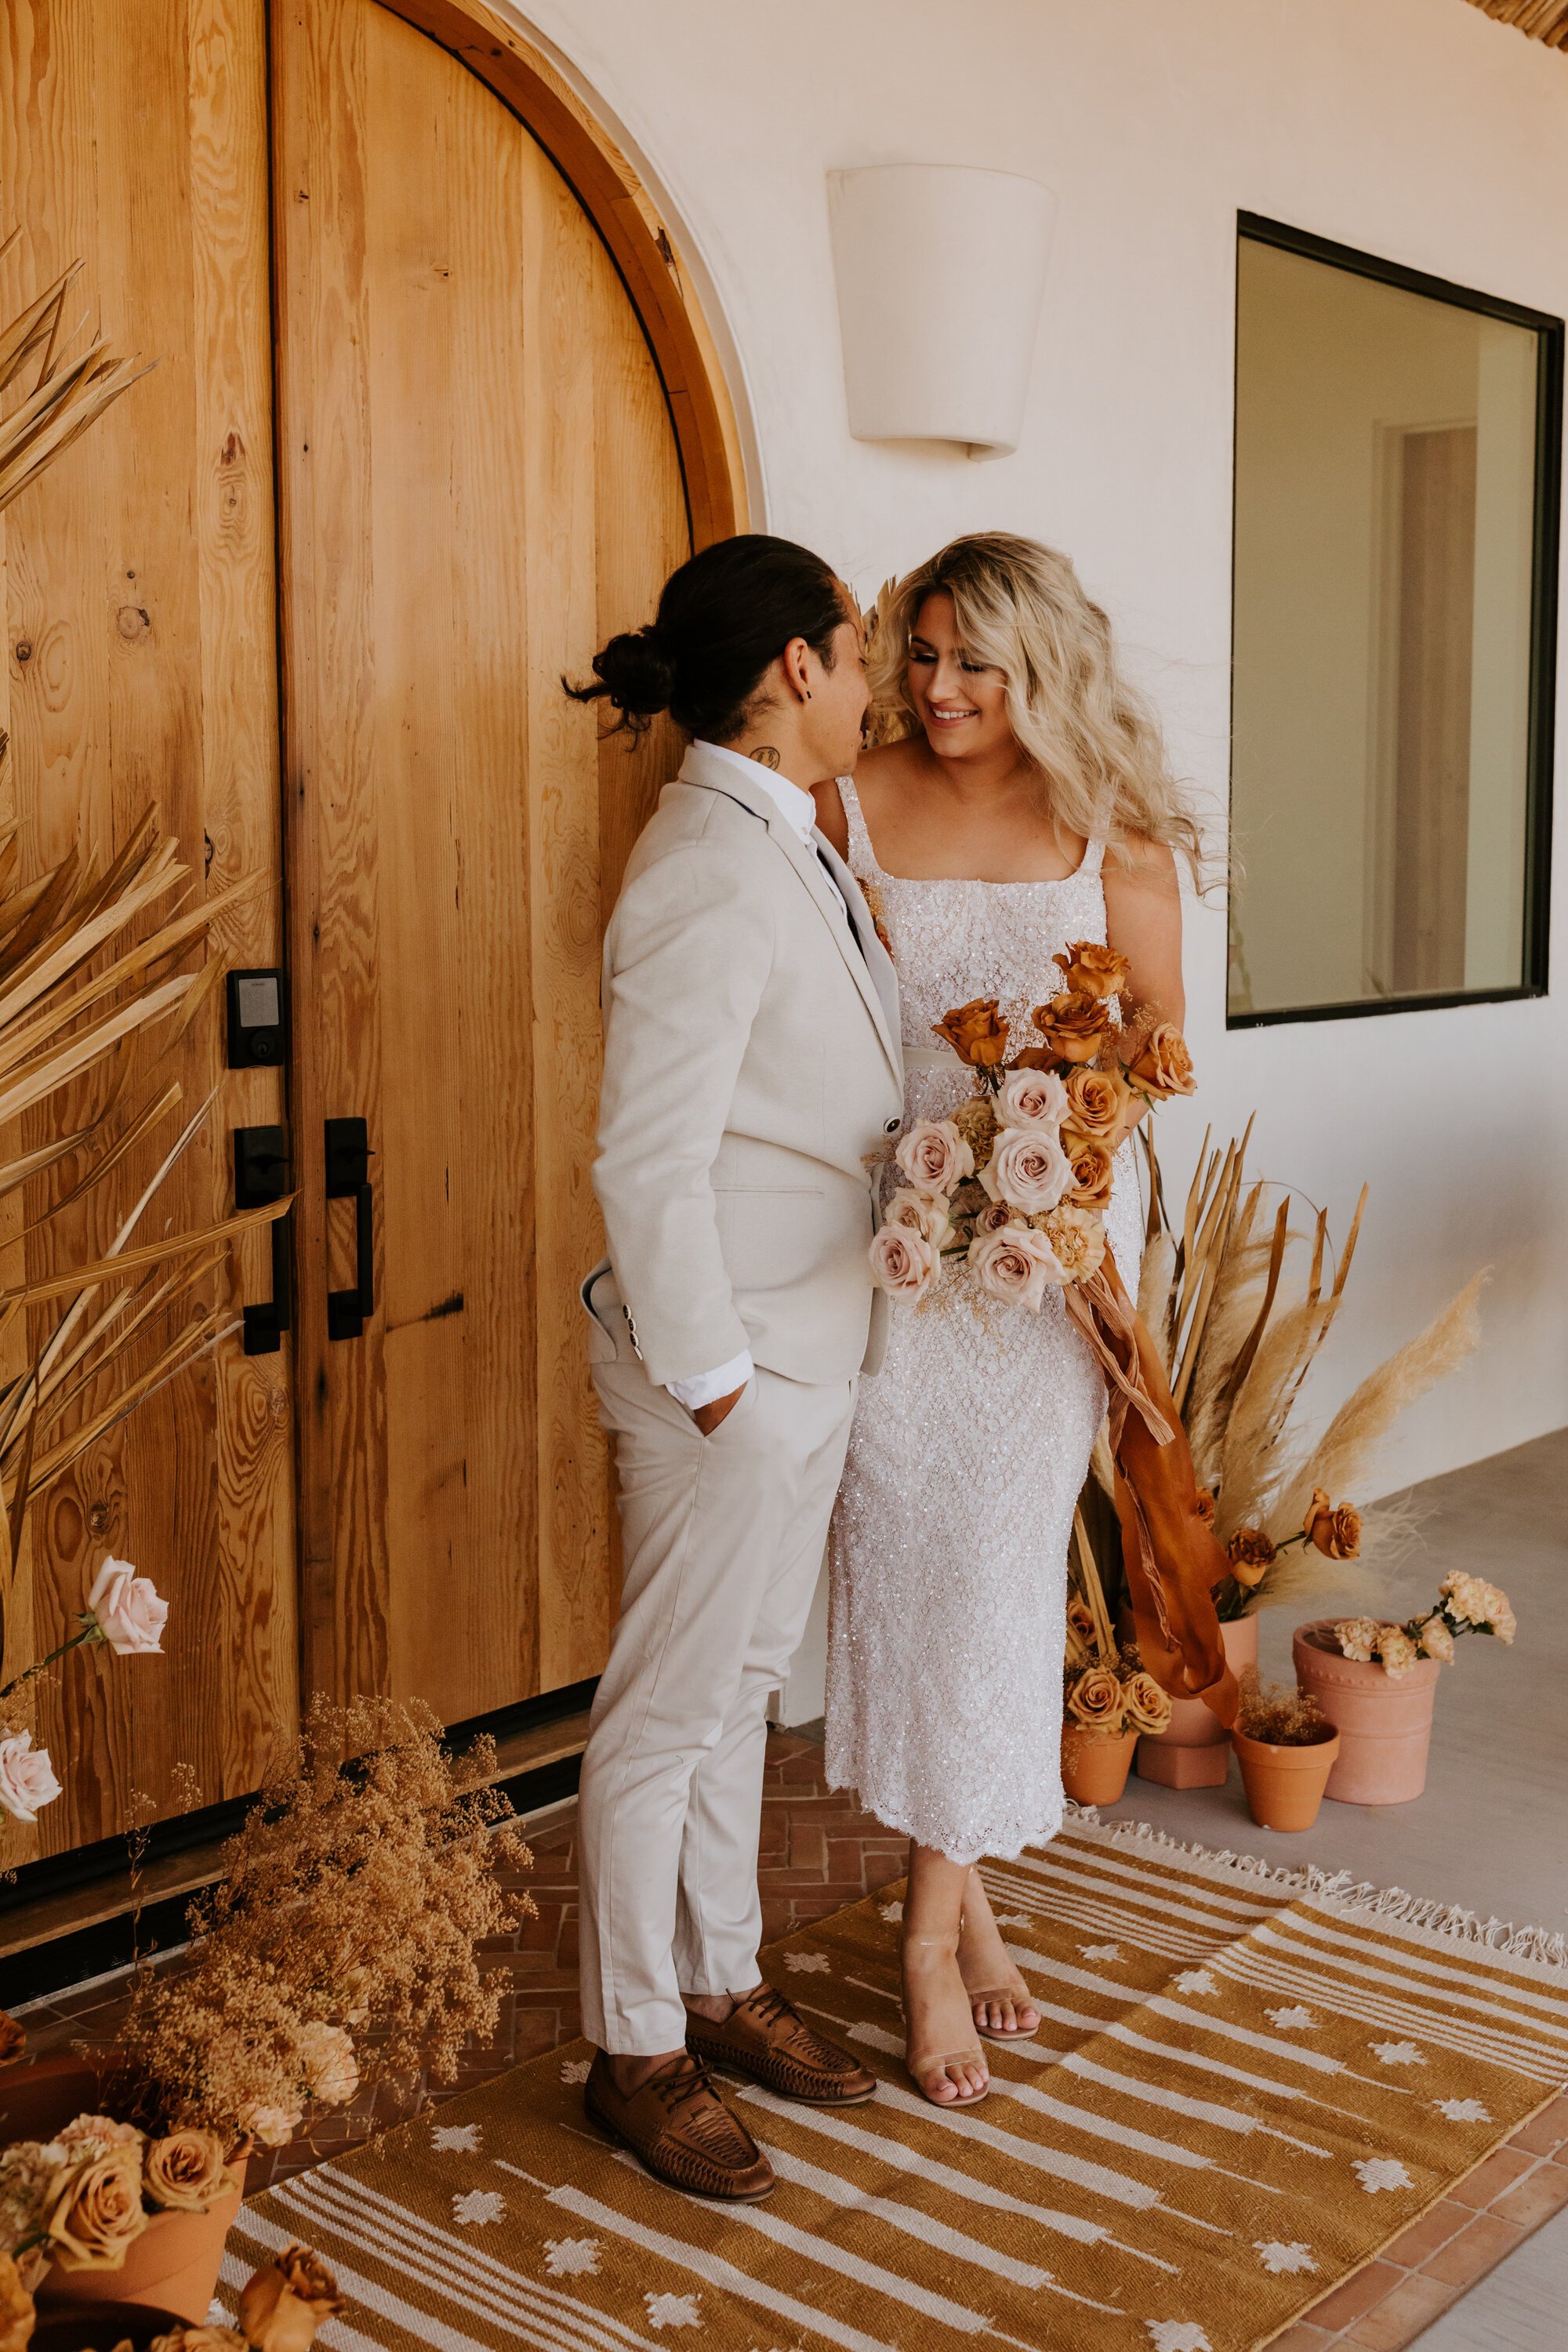 Rust neutral ombre bridal bouquet with rust ribbon | Joshua Tree Elopement | Florals by Cultivated by Faith | Photo by Tida Svy | www.tidasvy.com